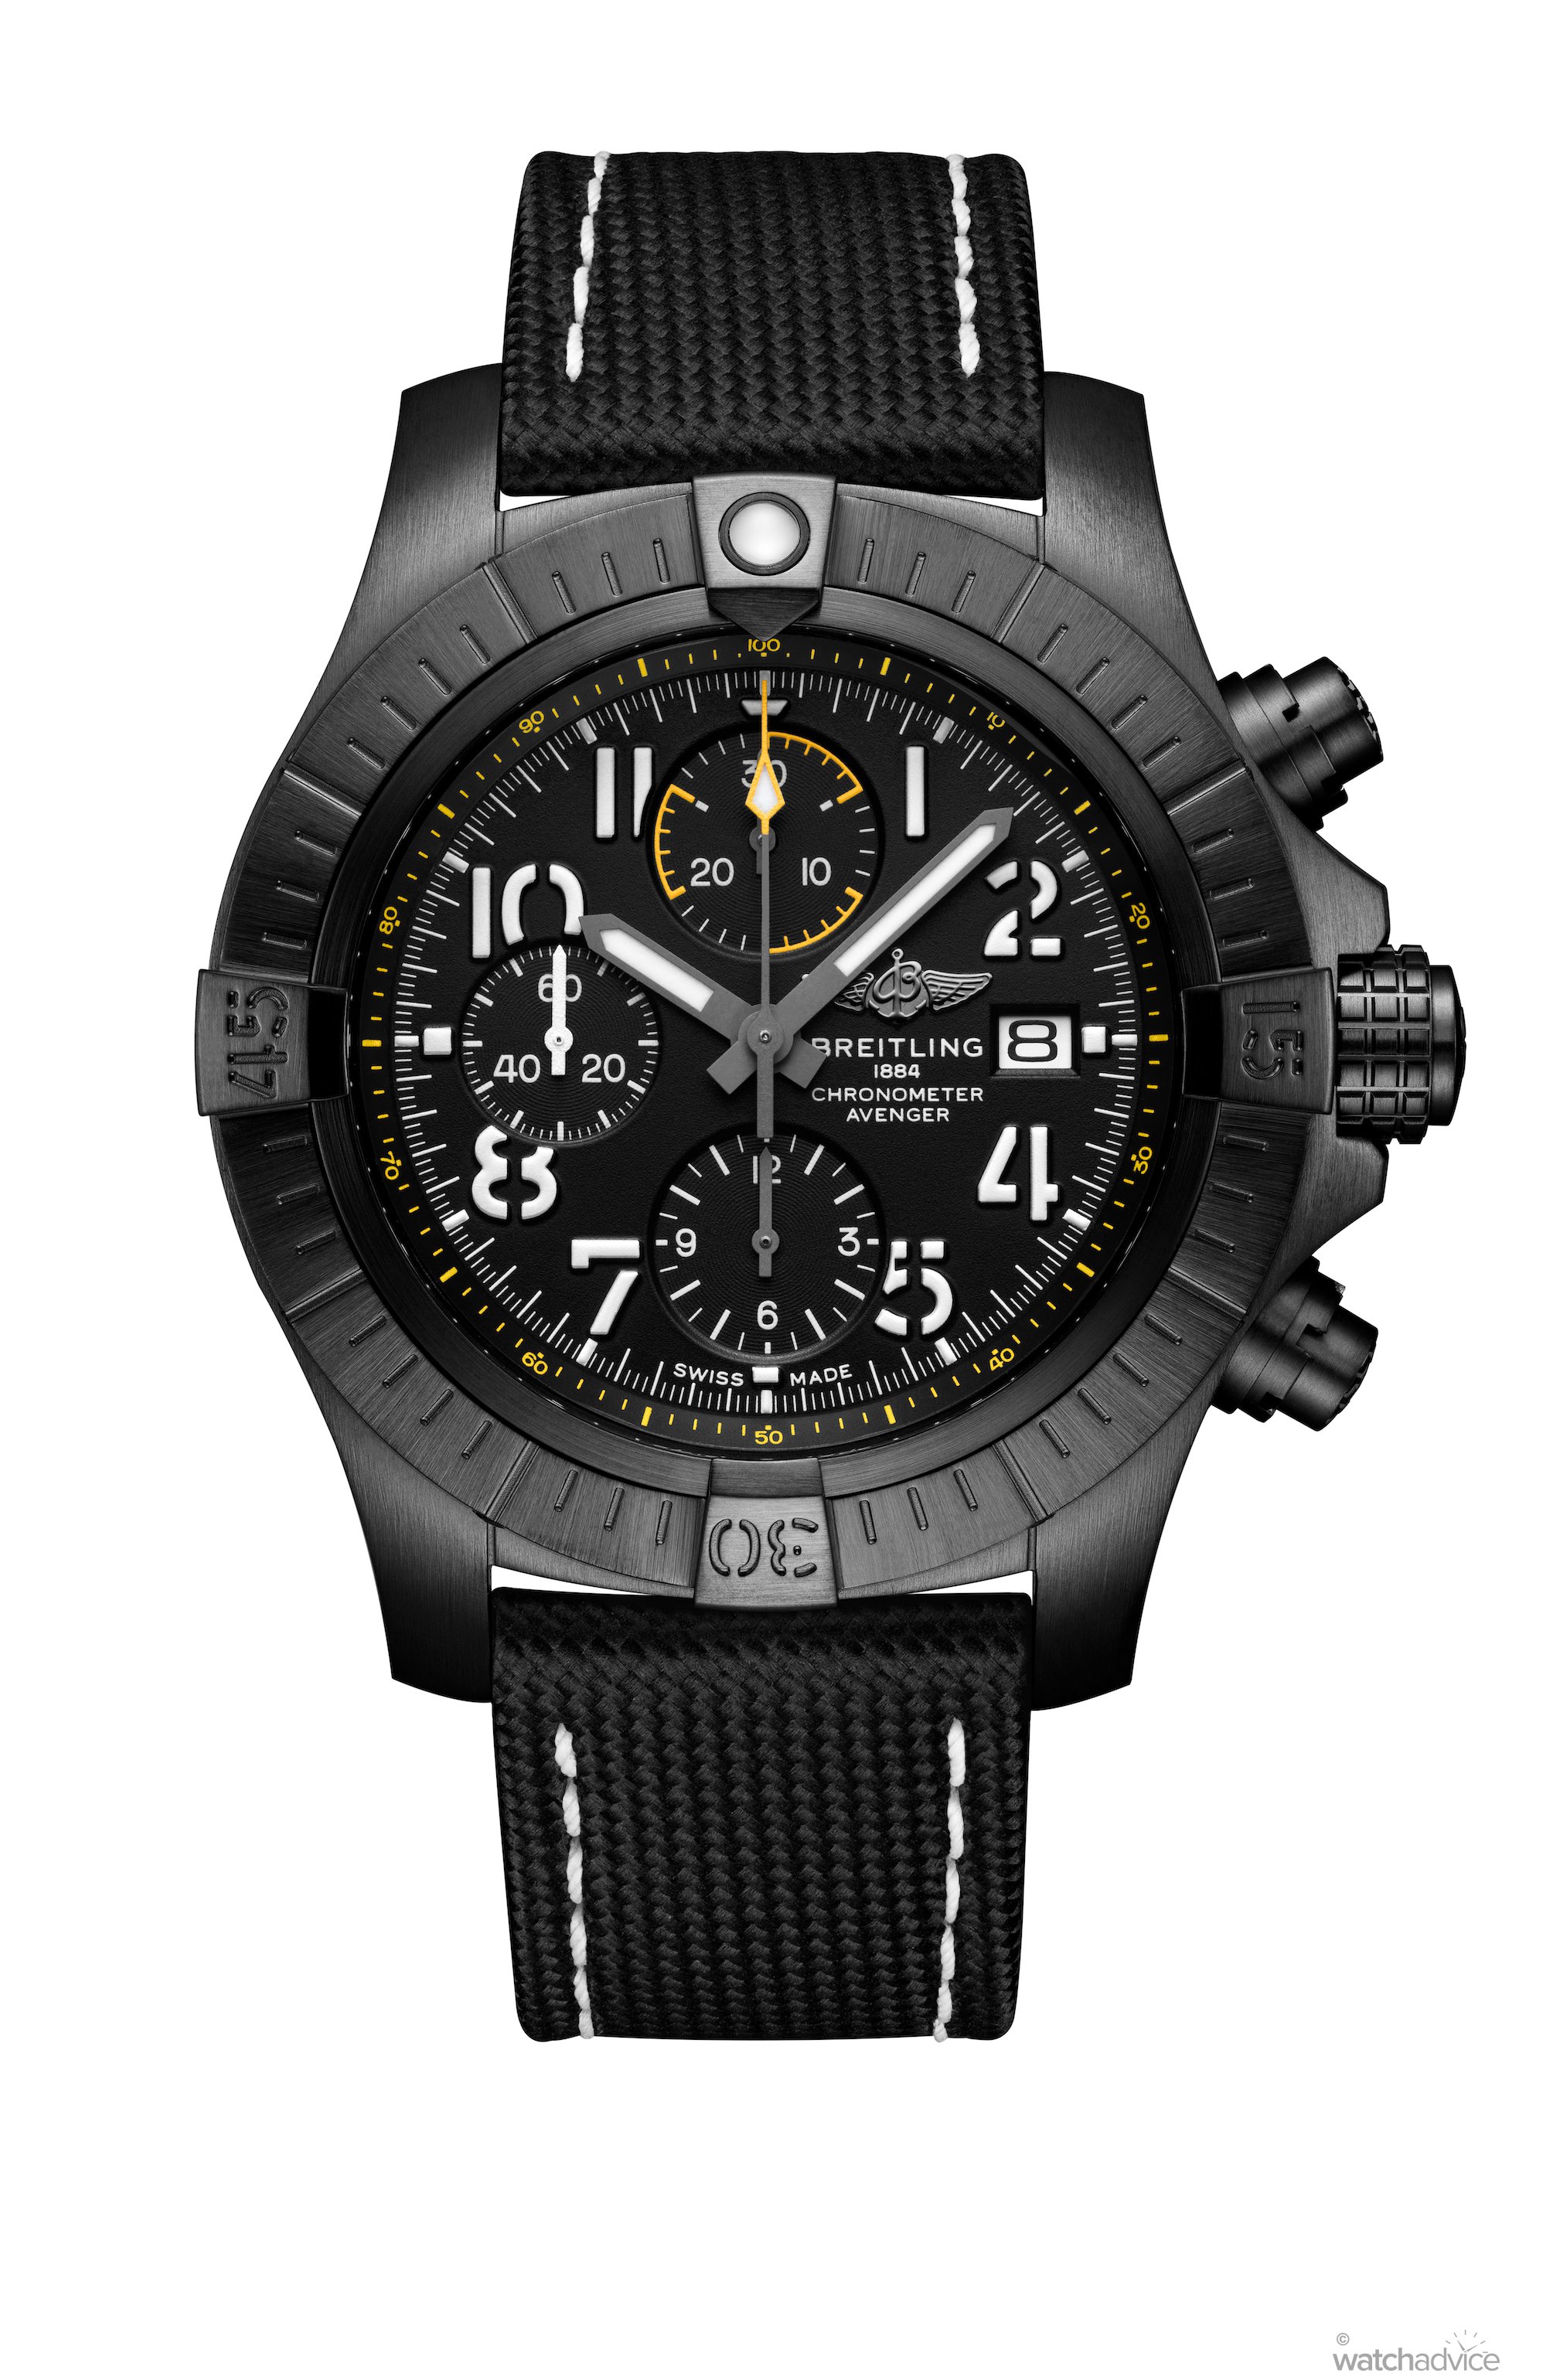 All new Breitling Avenger Collection – Watch Advice